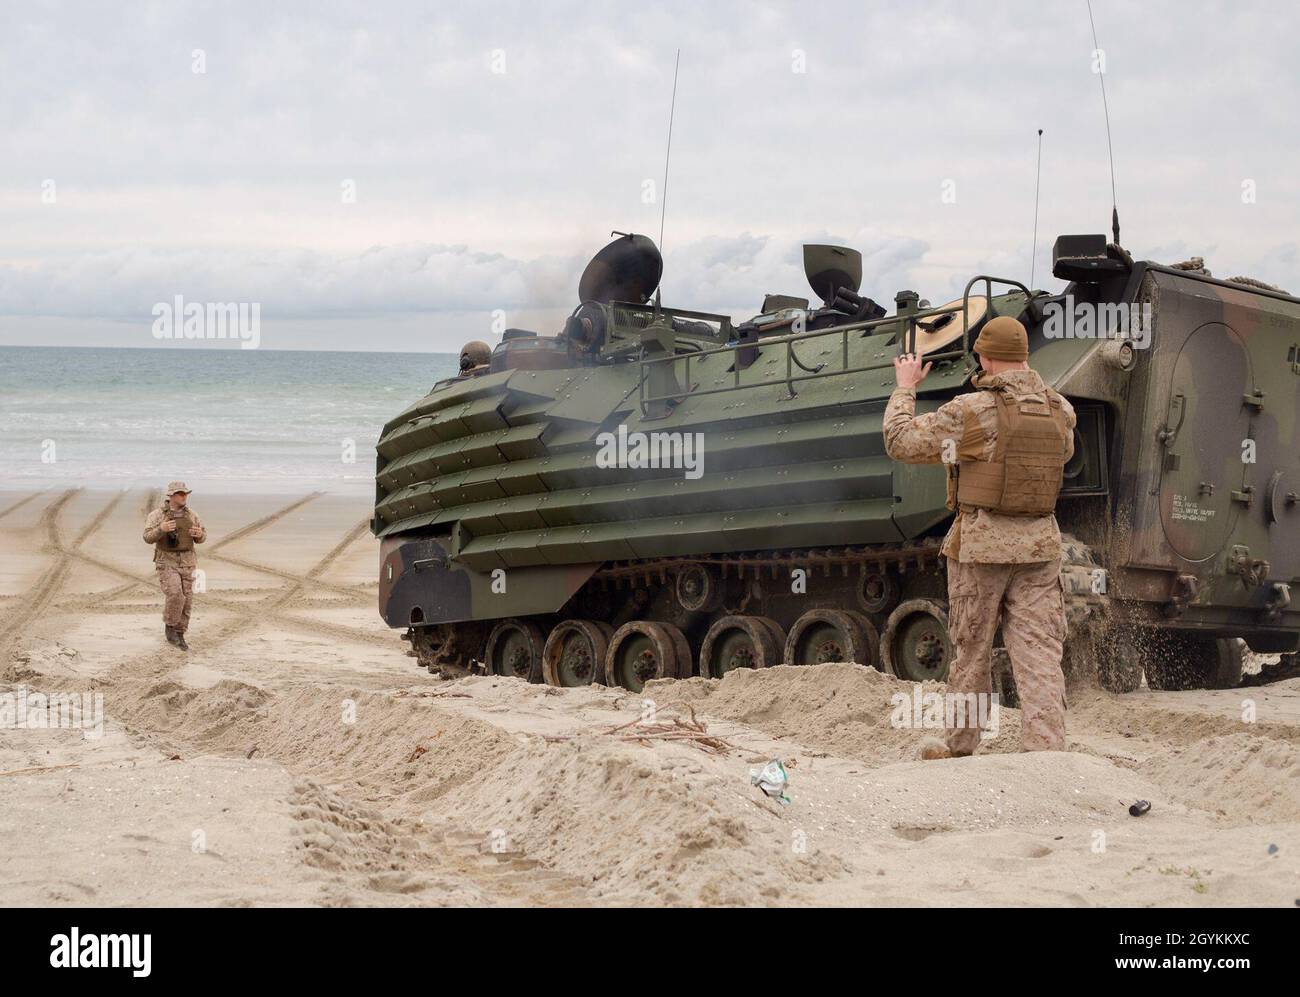 U.S. Marine Corps Cpl. Alexander Pritchard, left, a crew chief, and Cpl. Tyler Brenot, an assault amphibious vehicle crewmember, both with 3rd Assault Amphibian Battalion, ground guide an AAV-P7/A1 assault amphibious vehicle in preparation for section-level beach landing training during Exercise Iron Fist 2020 on Marine Corps Base Camp Pendleton, California, Jan. 20. Exercises like Iron Fist enhance the Marine Corps ability to quickly deploy sea-based assets and provide military forces anywhere in the world. (U.S. Marine Corps photo by Sgt. Desiree King) Stock Photo